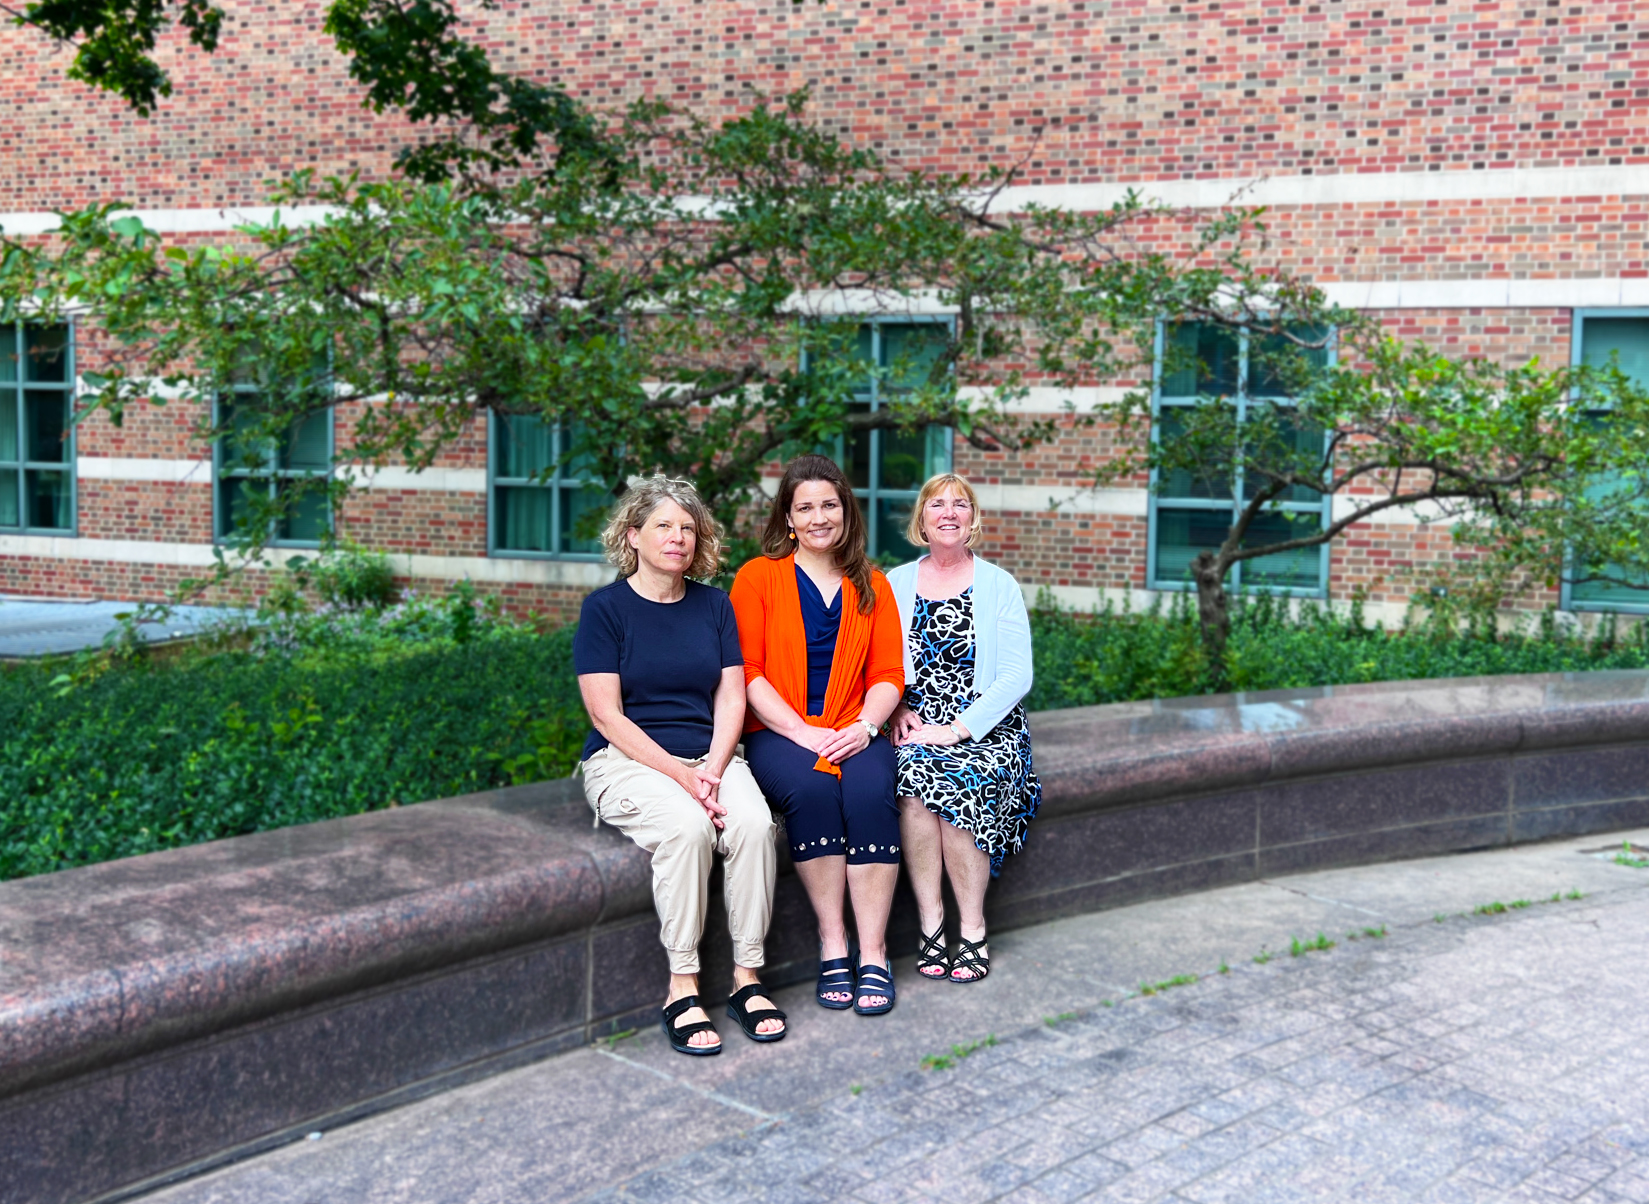 Stephanie Ceman, Laura Hetrick and Tracey Wszalek outside the Beckman Institute.